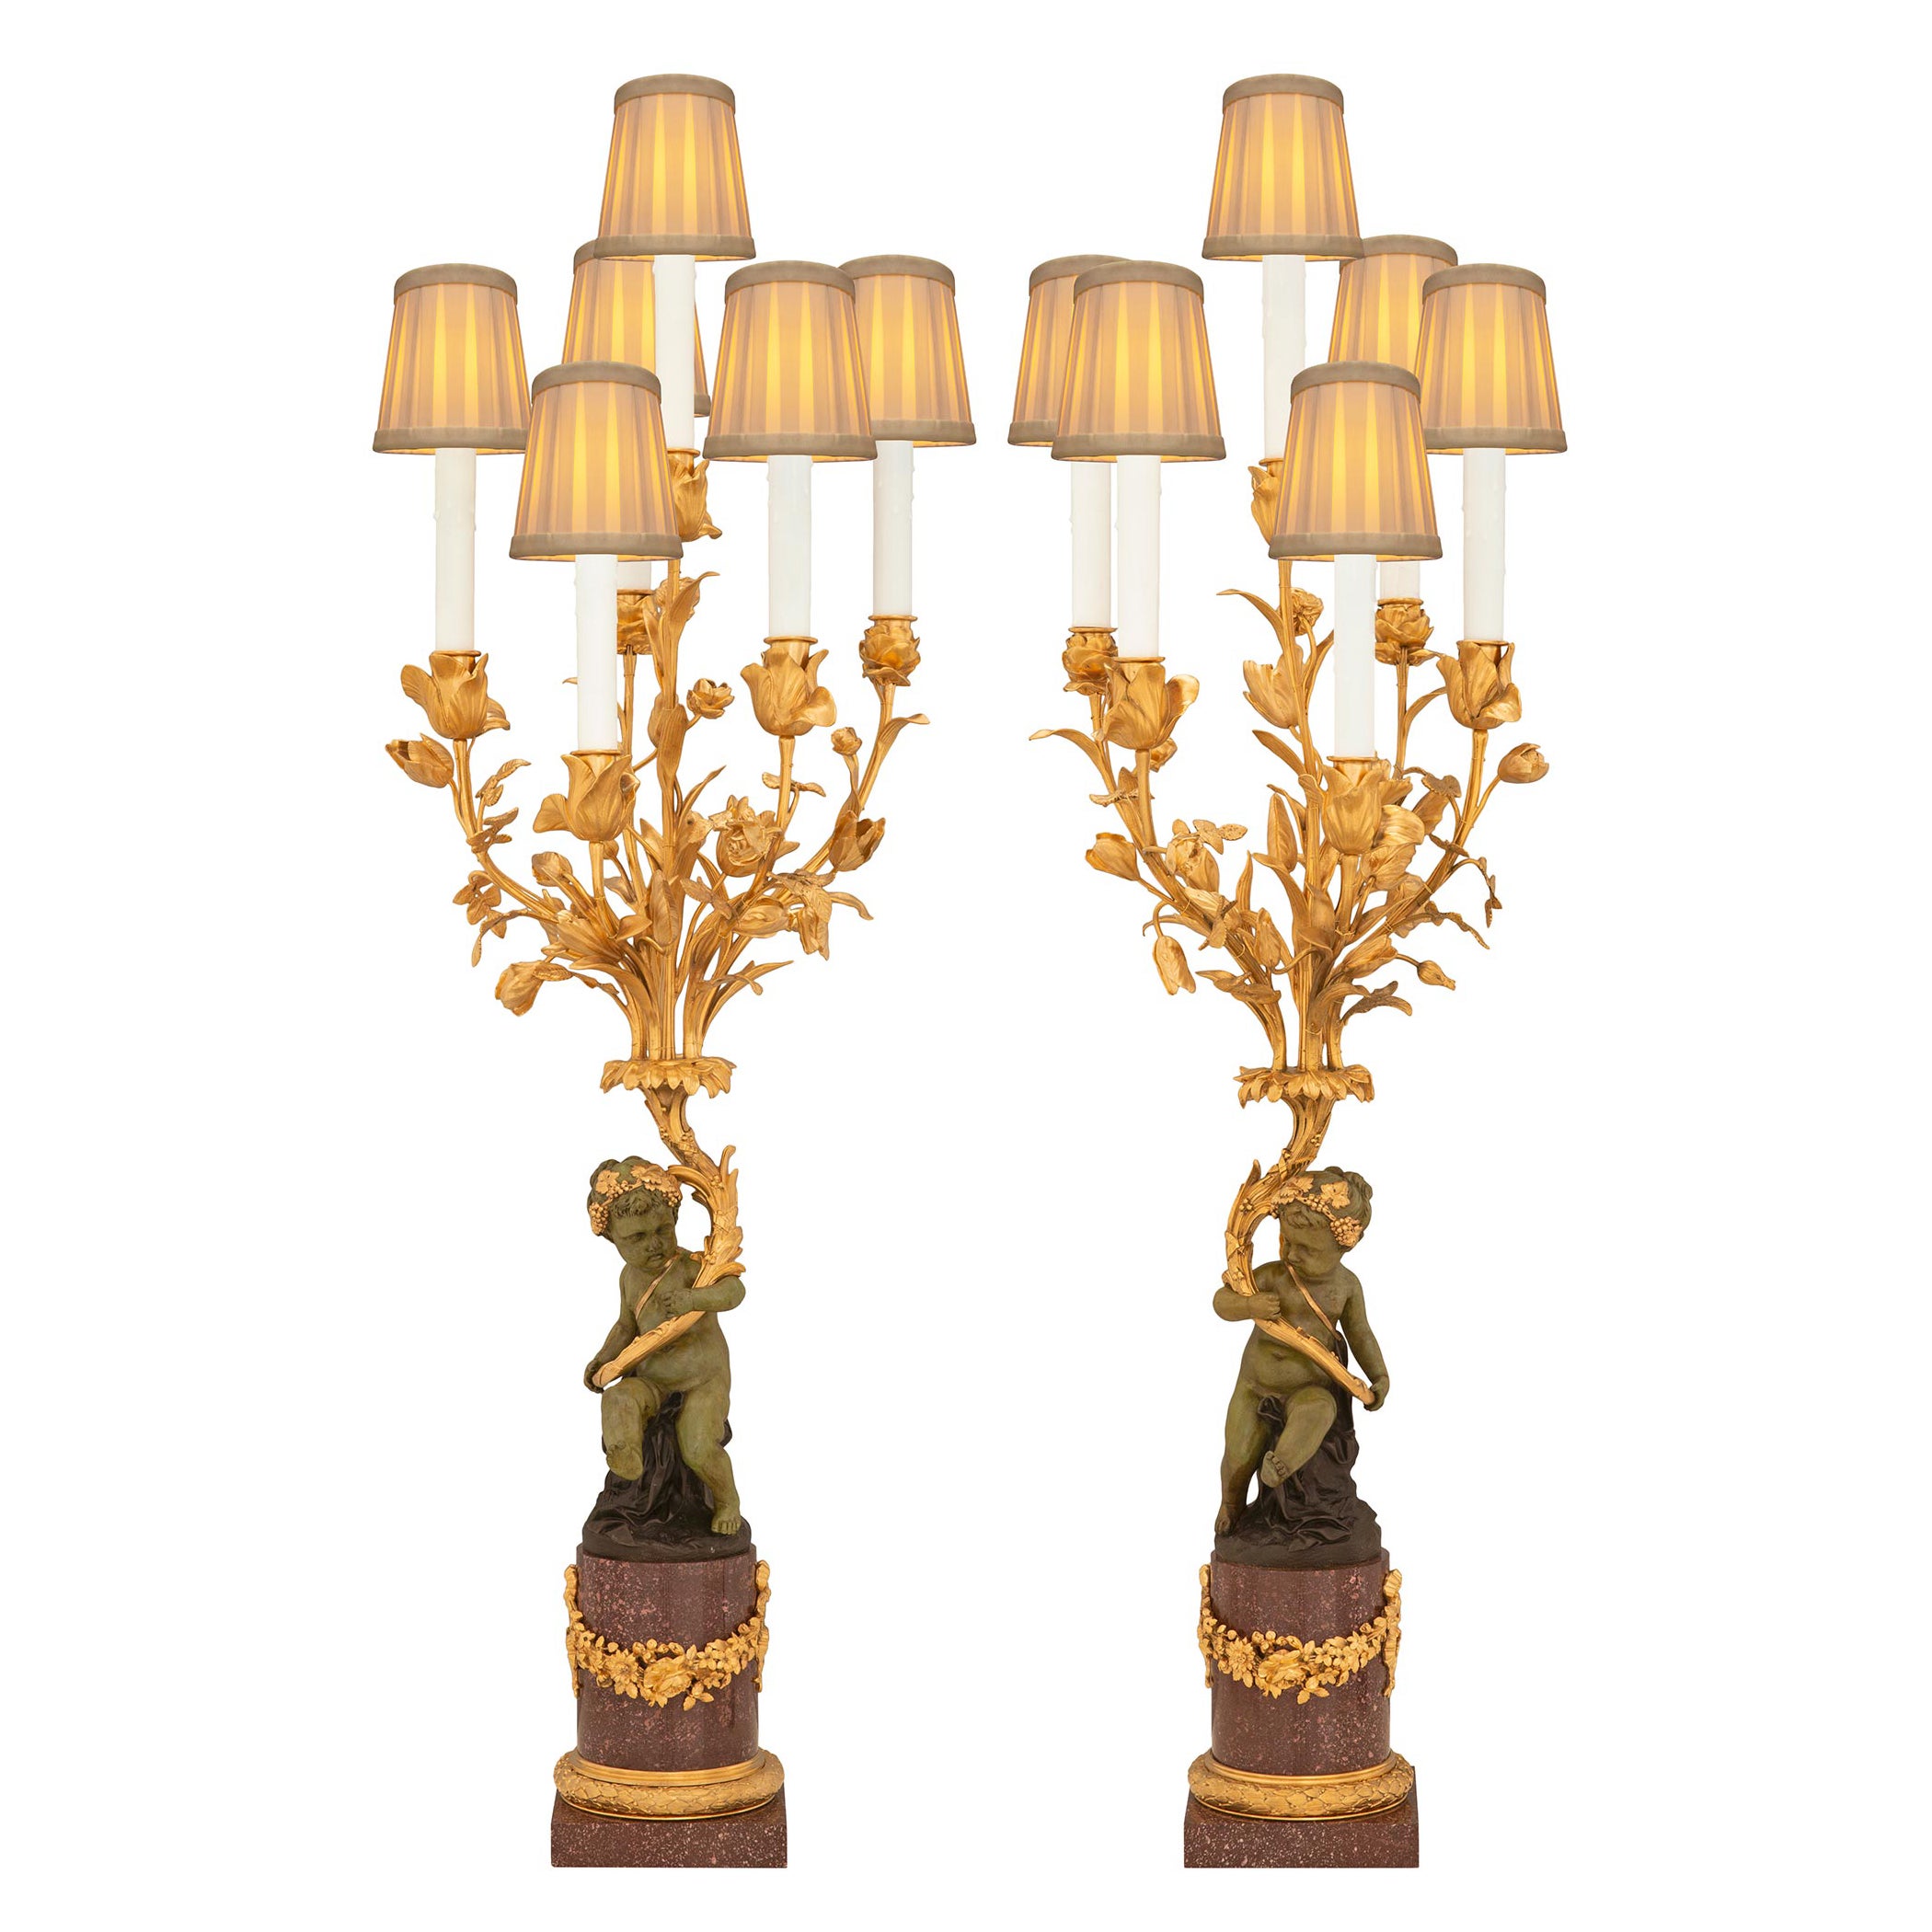 True Pair of French 19th Century Belle Époque Period Bronze & Porphyry Lamps For Sale